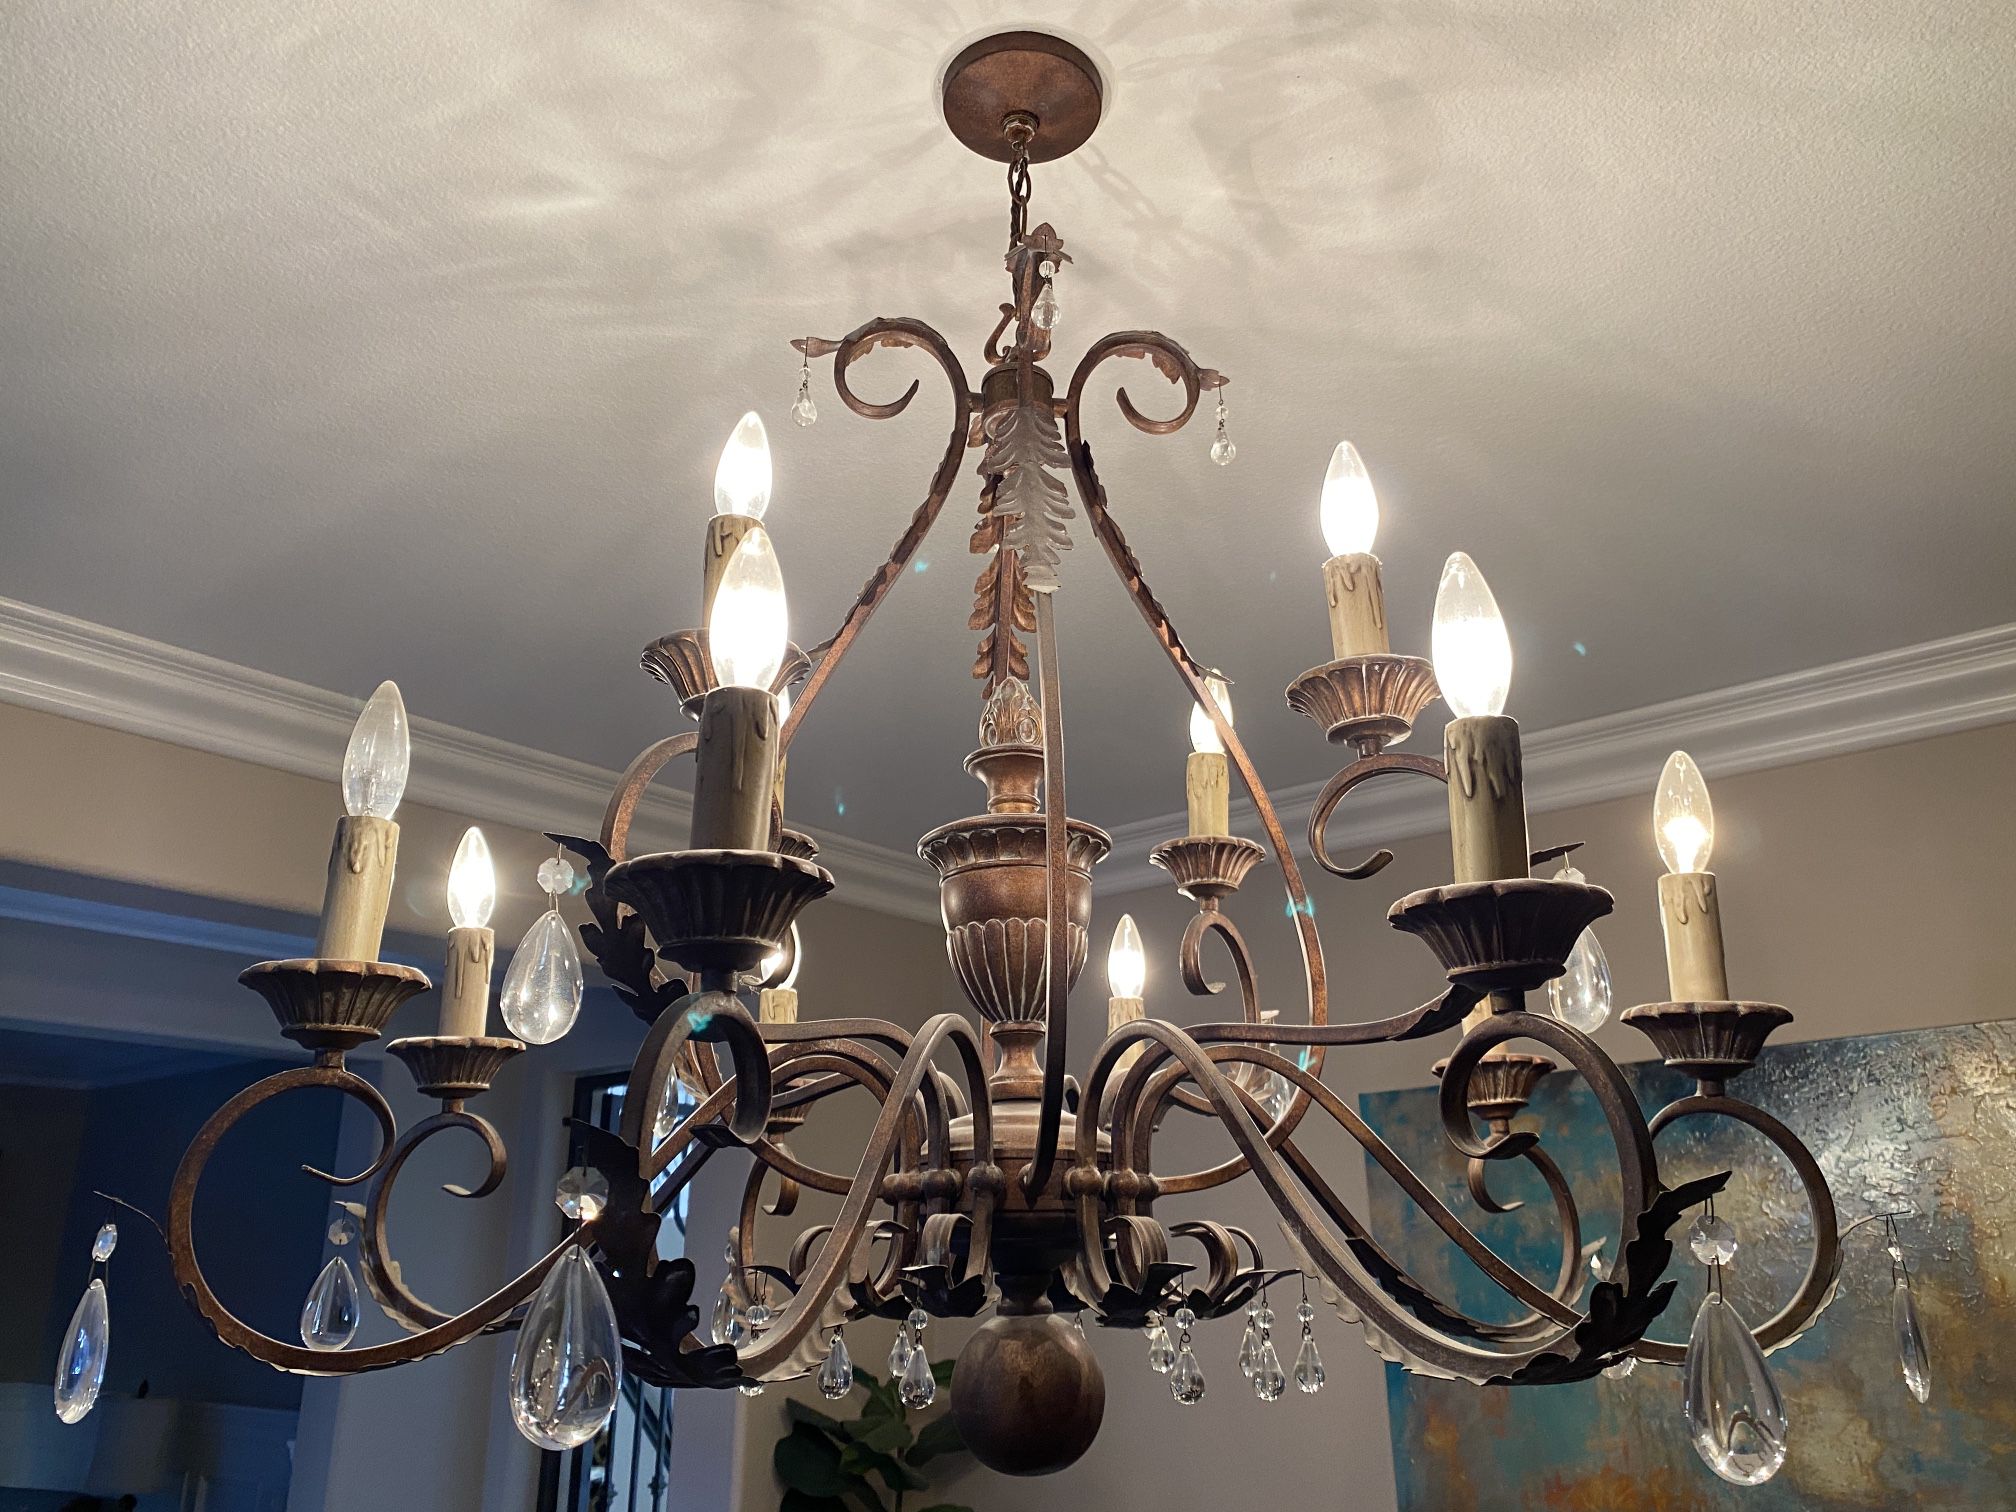 40” French Chandelier